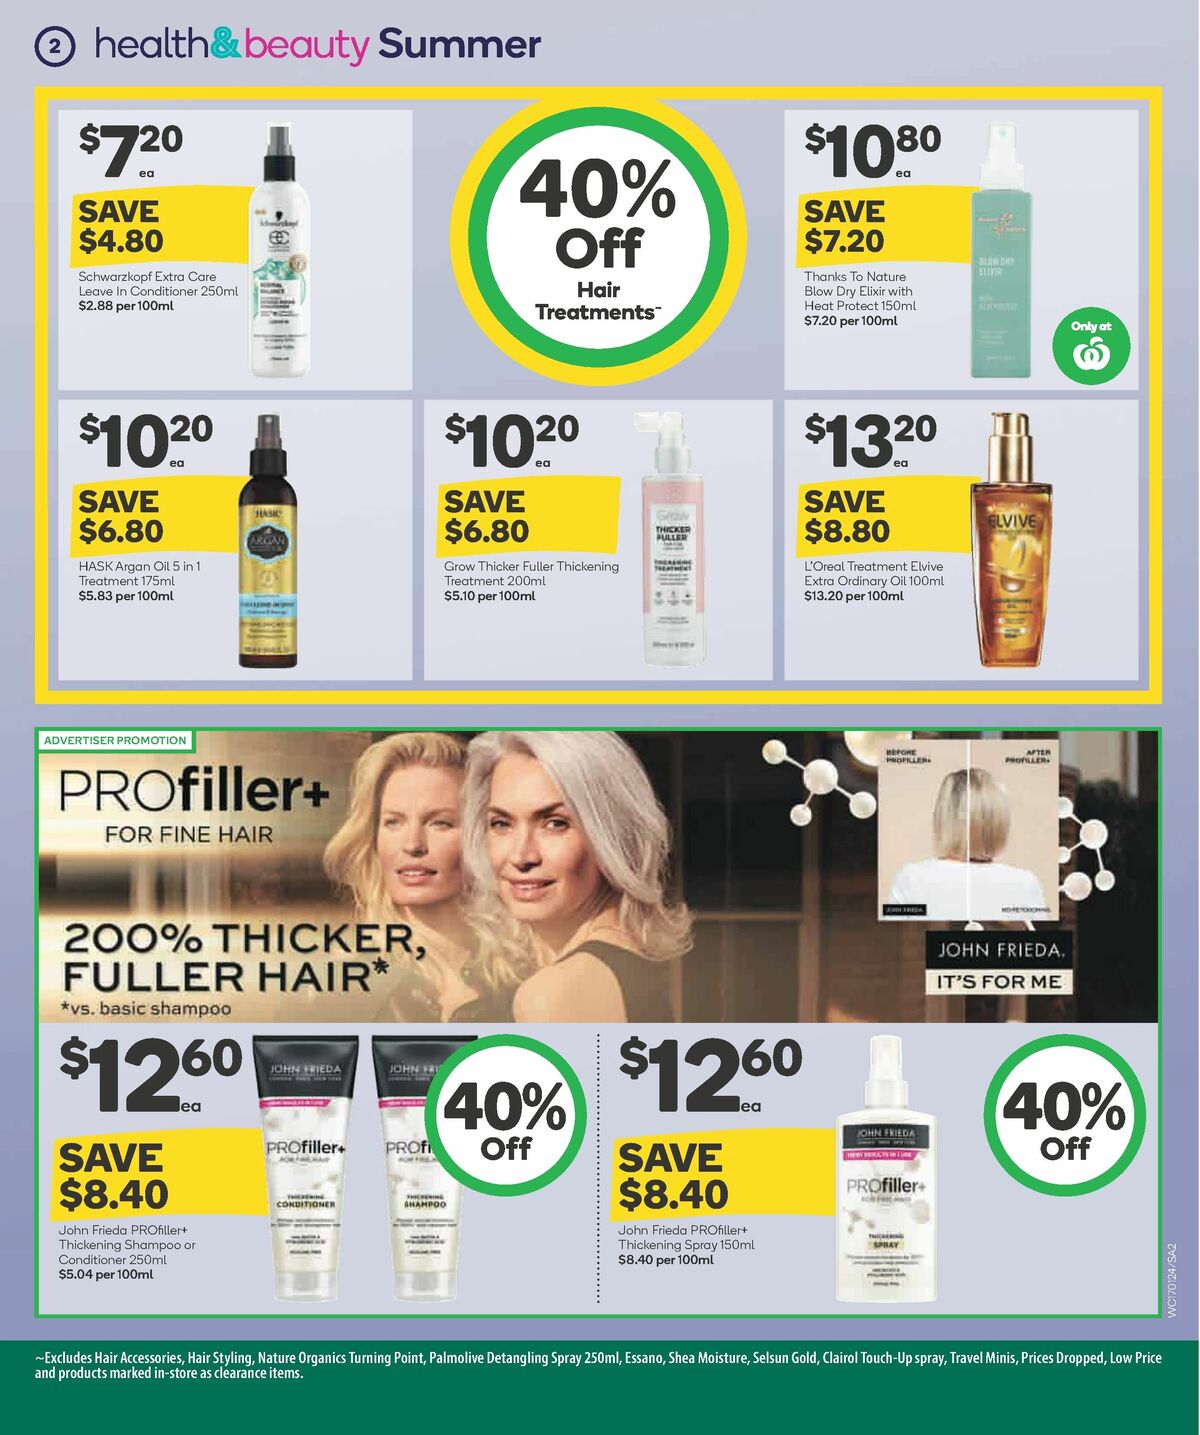 Woolworths Spring Health & Beauty Catalogues from 17 January